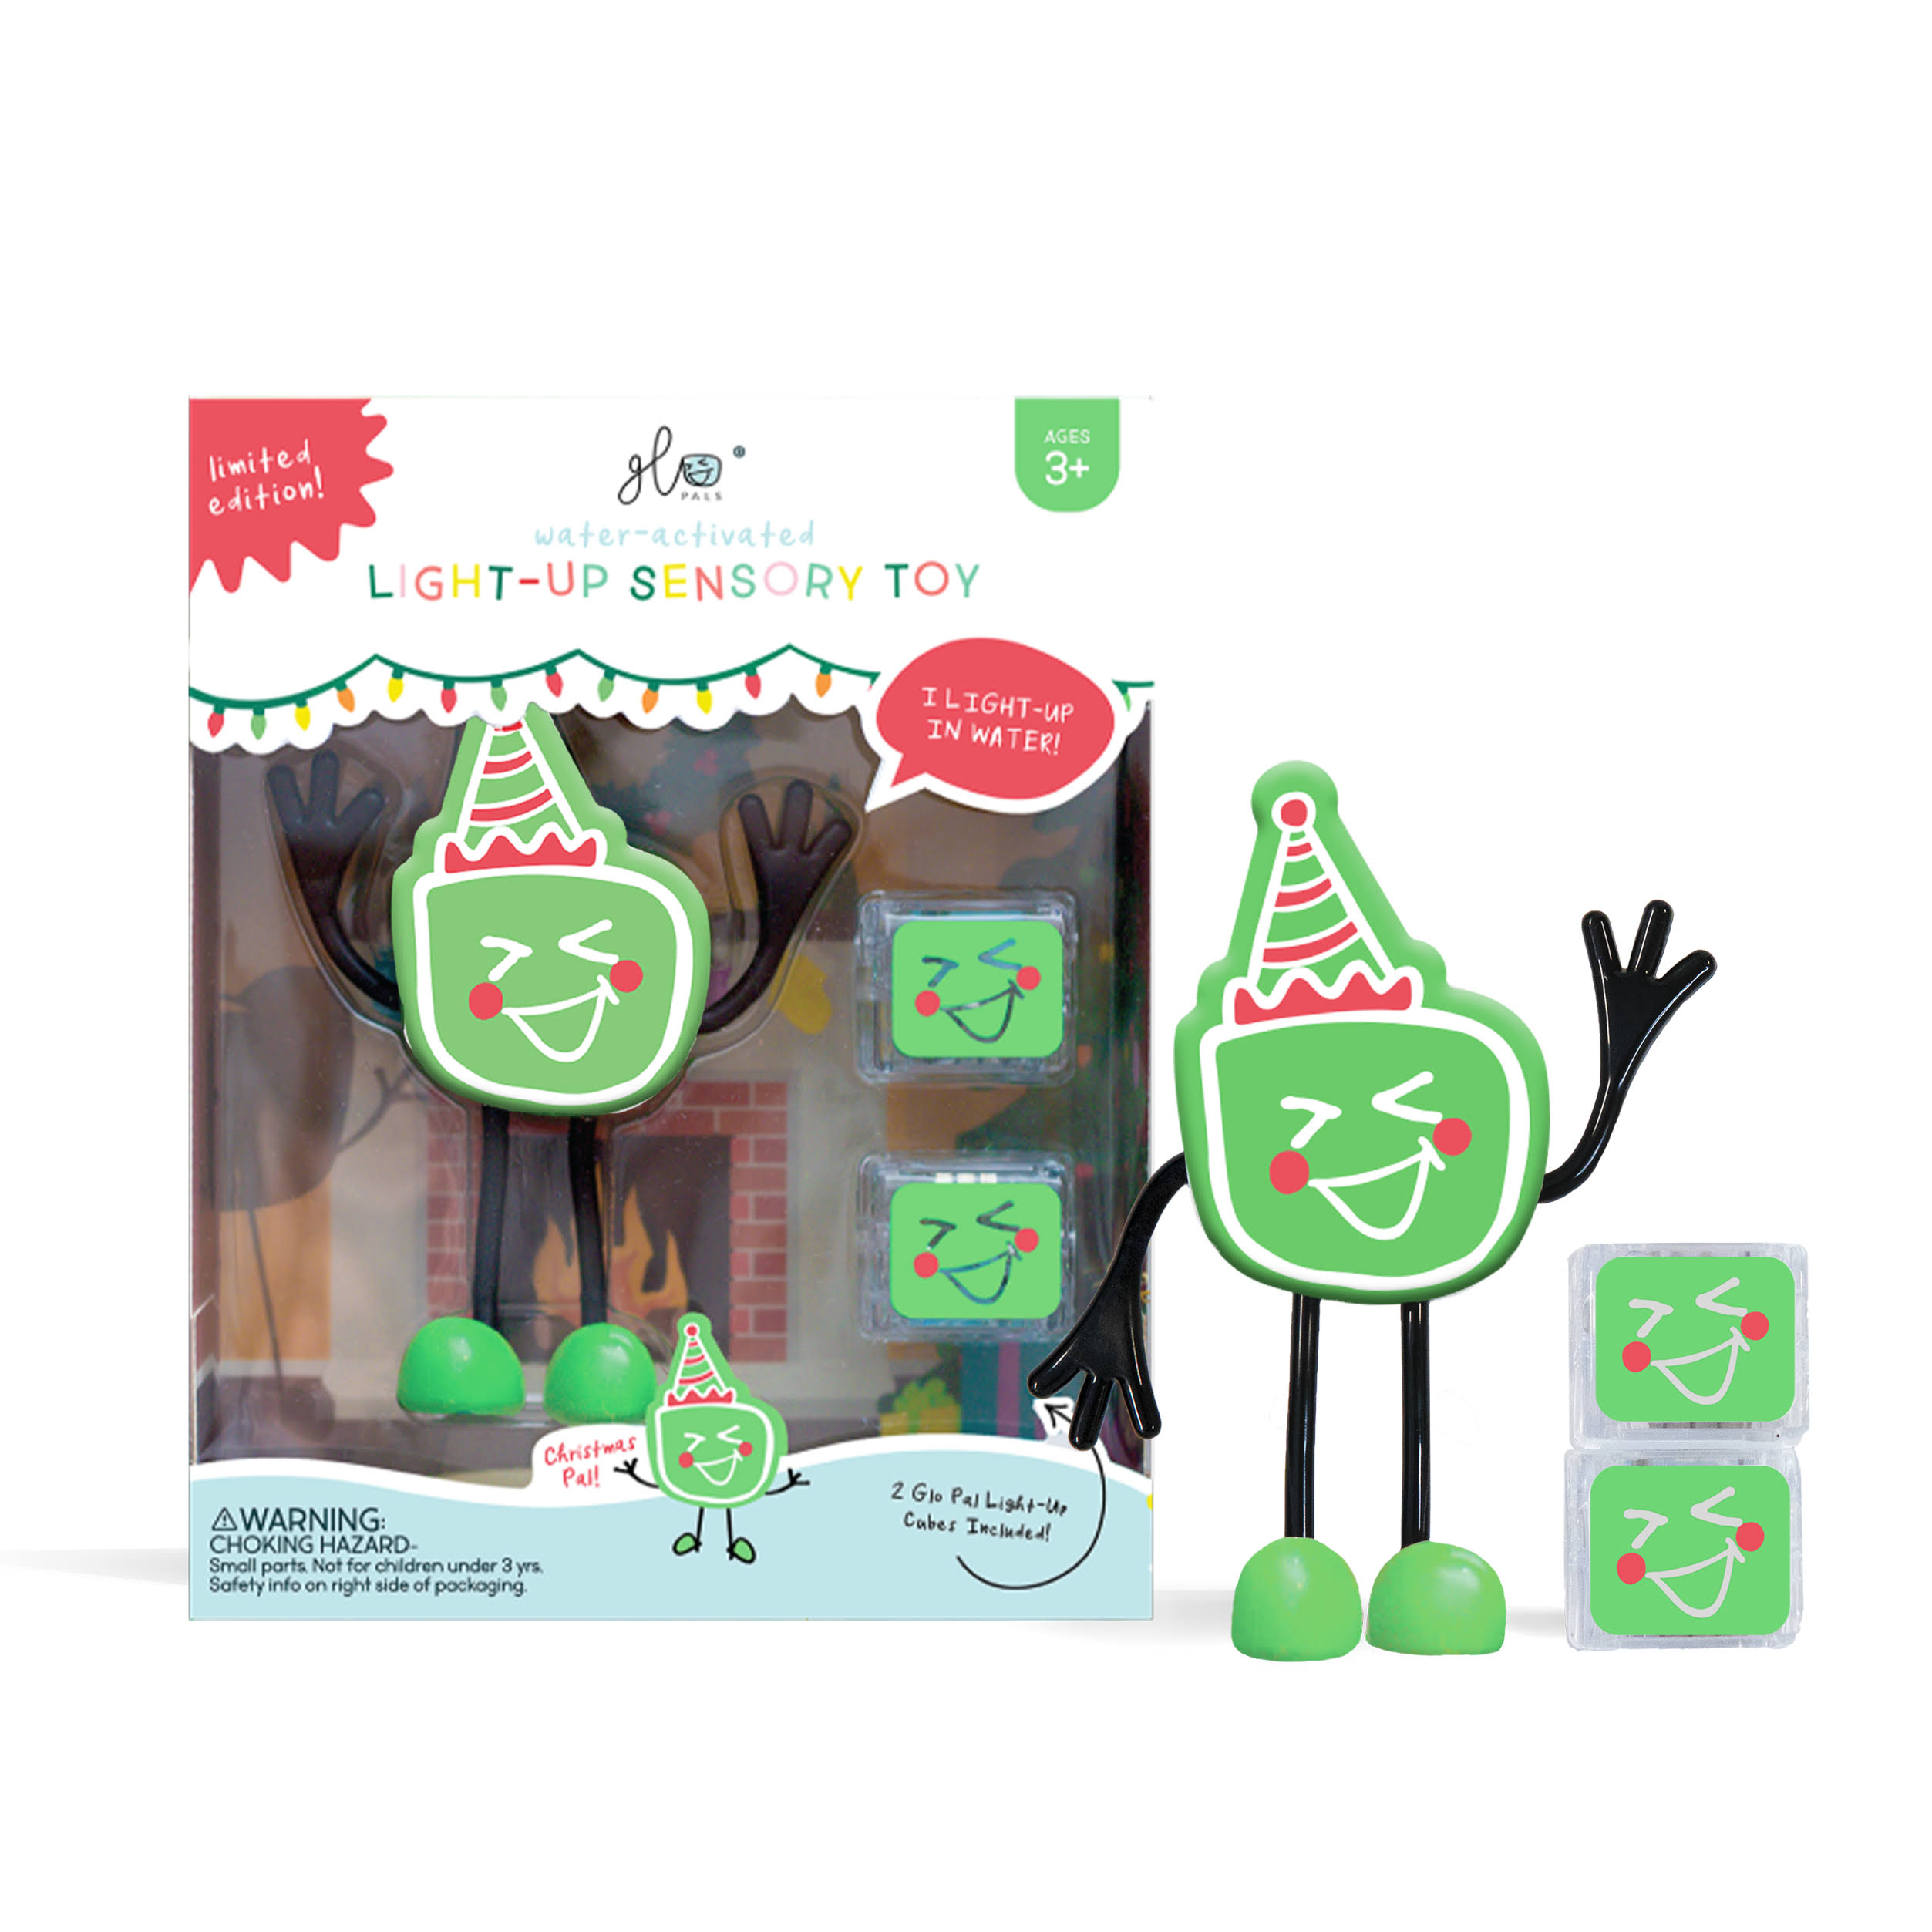 Glo Pals - Toy with 2 Water-Activated Light Up Cubes, Christmas Pal